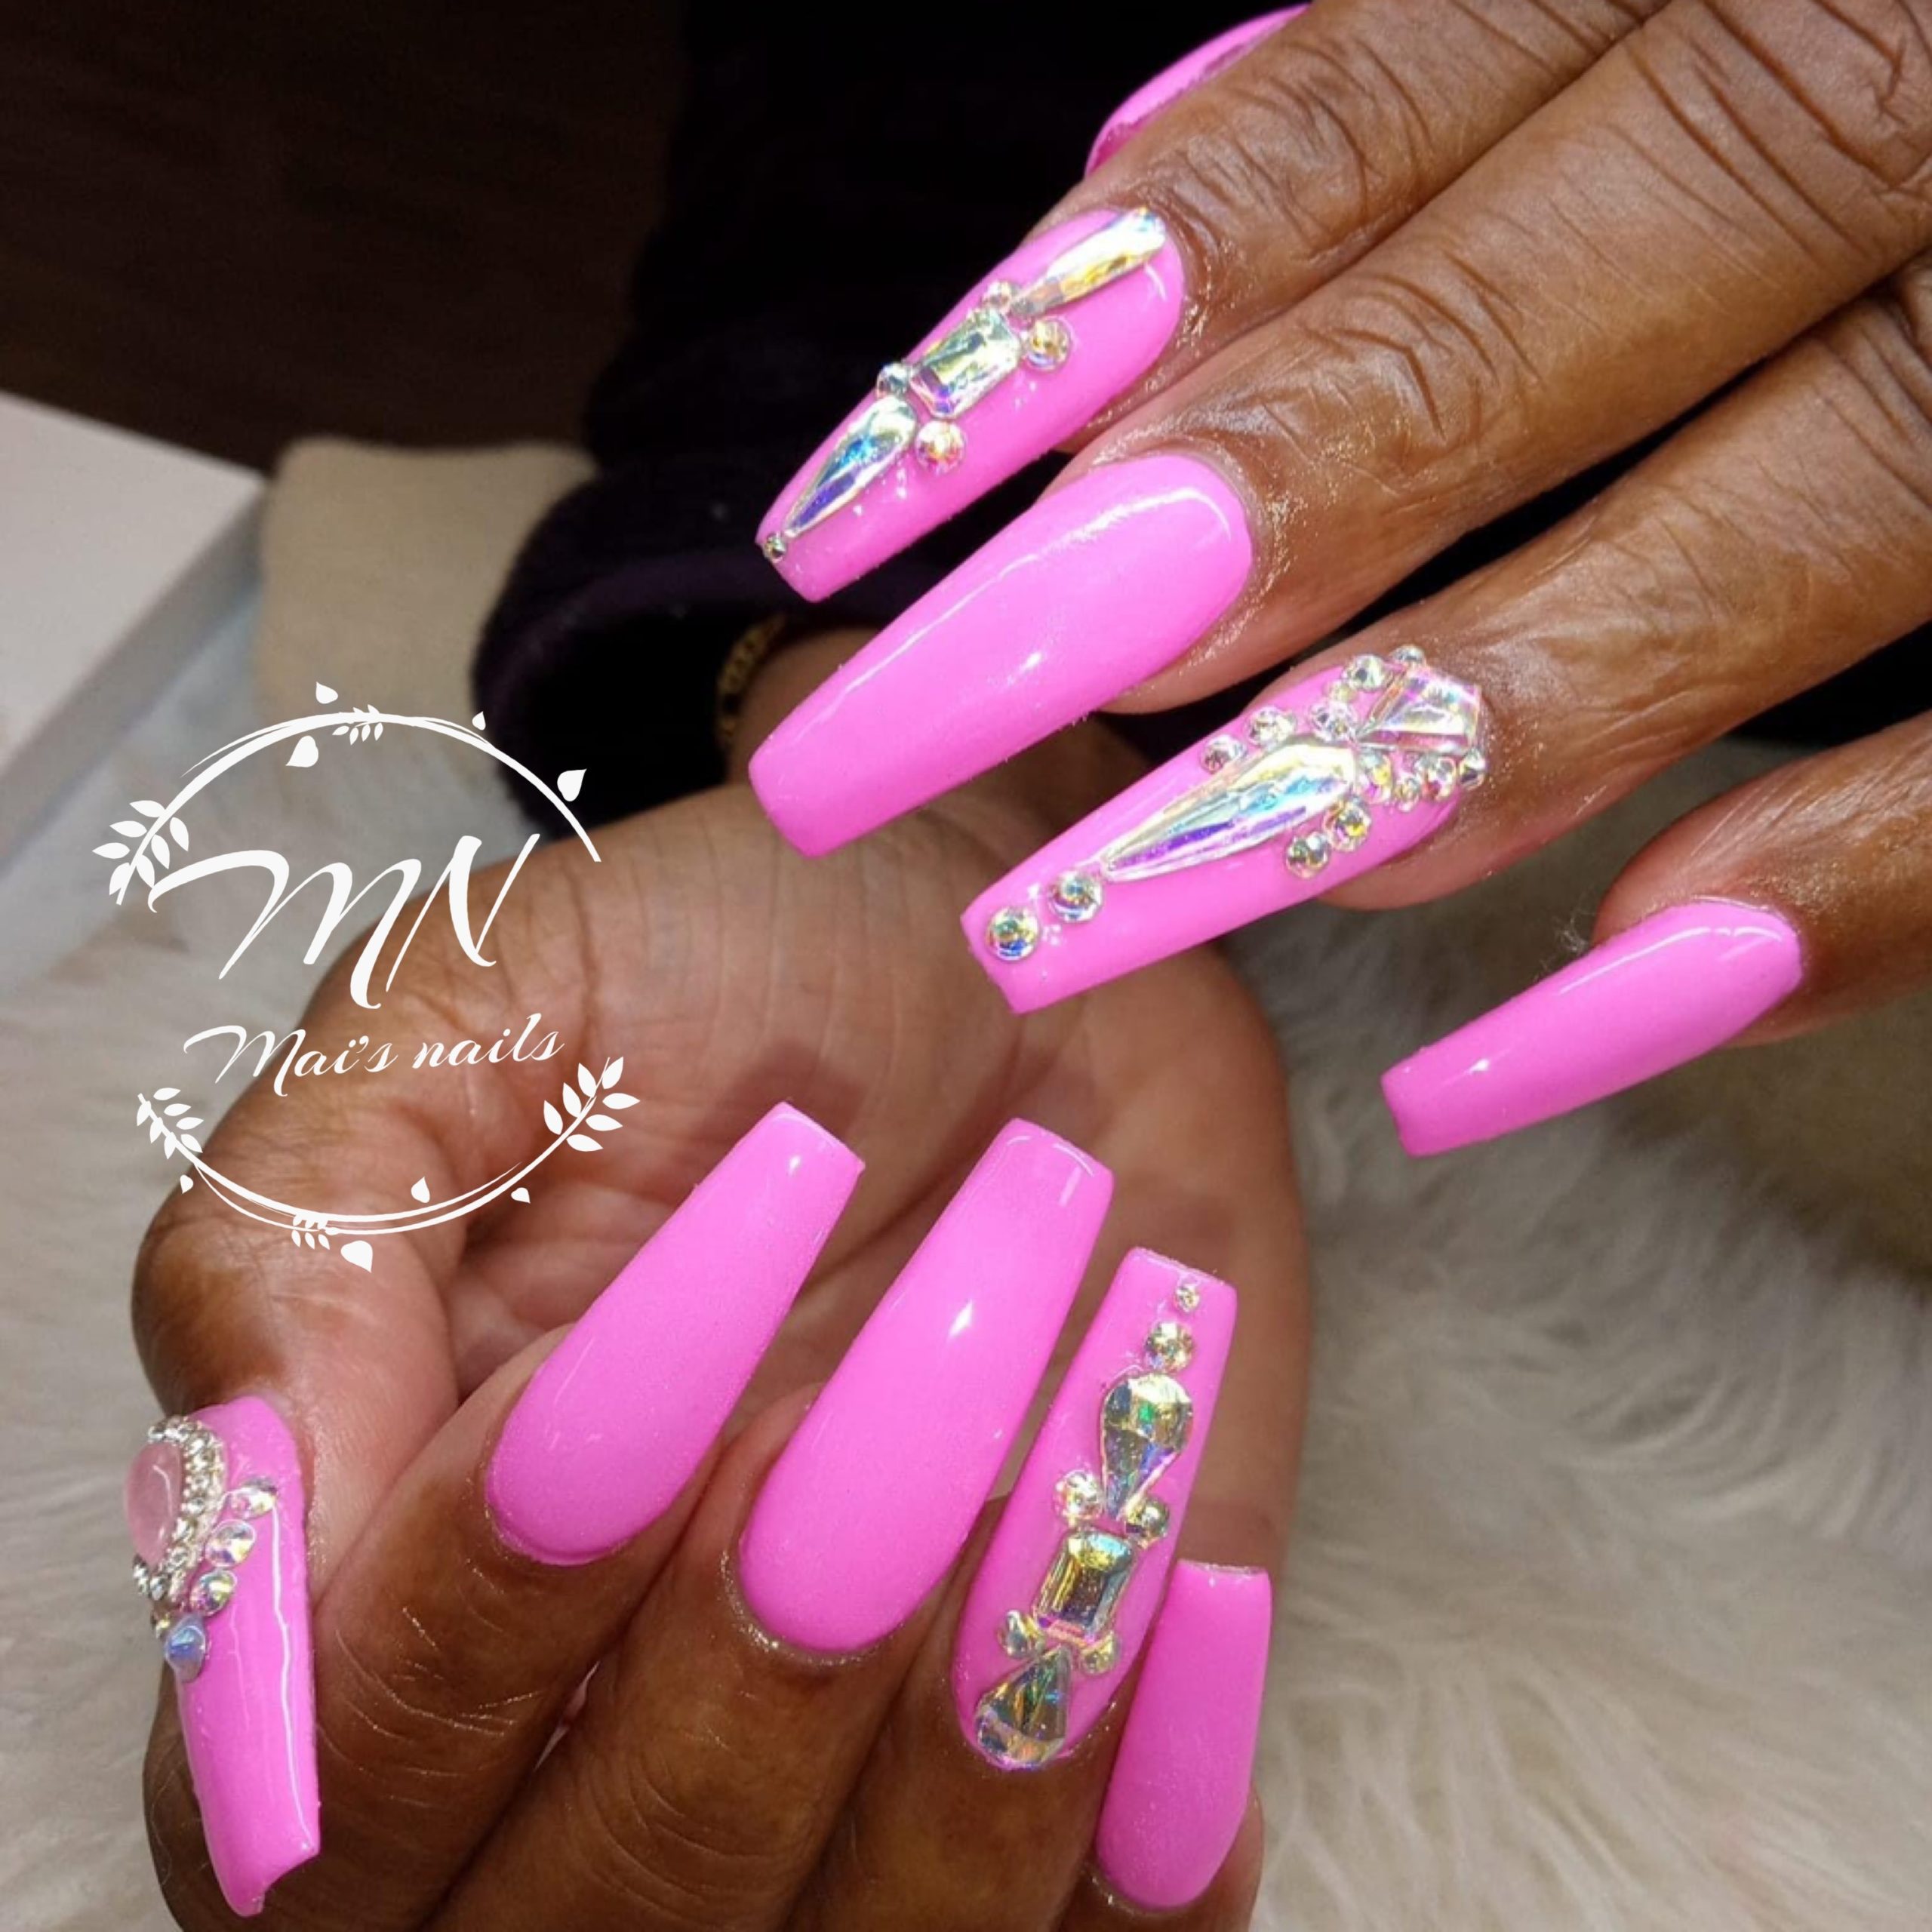 Nail Salon 28403 | Essence Nails and Spa of Wilmington, NC | Gel Manicure,  Spa Pedicure, Enhancements, Pink and White, Acrylic, Dip Powder